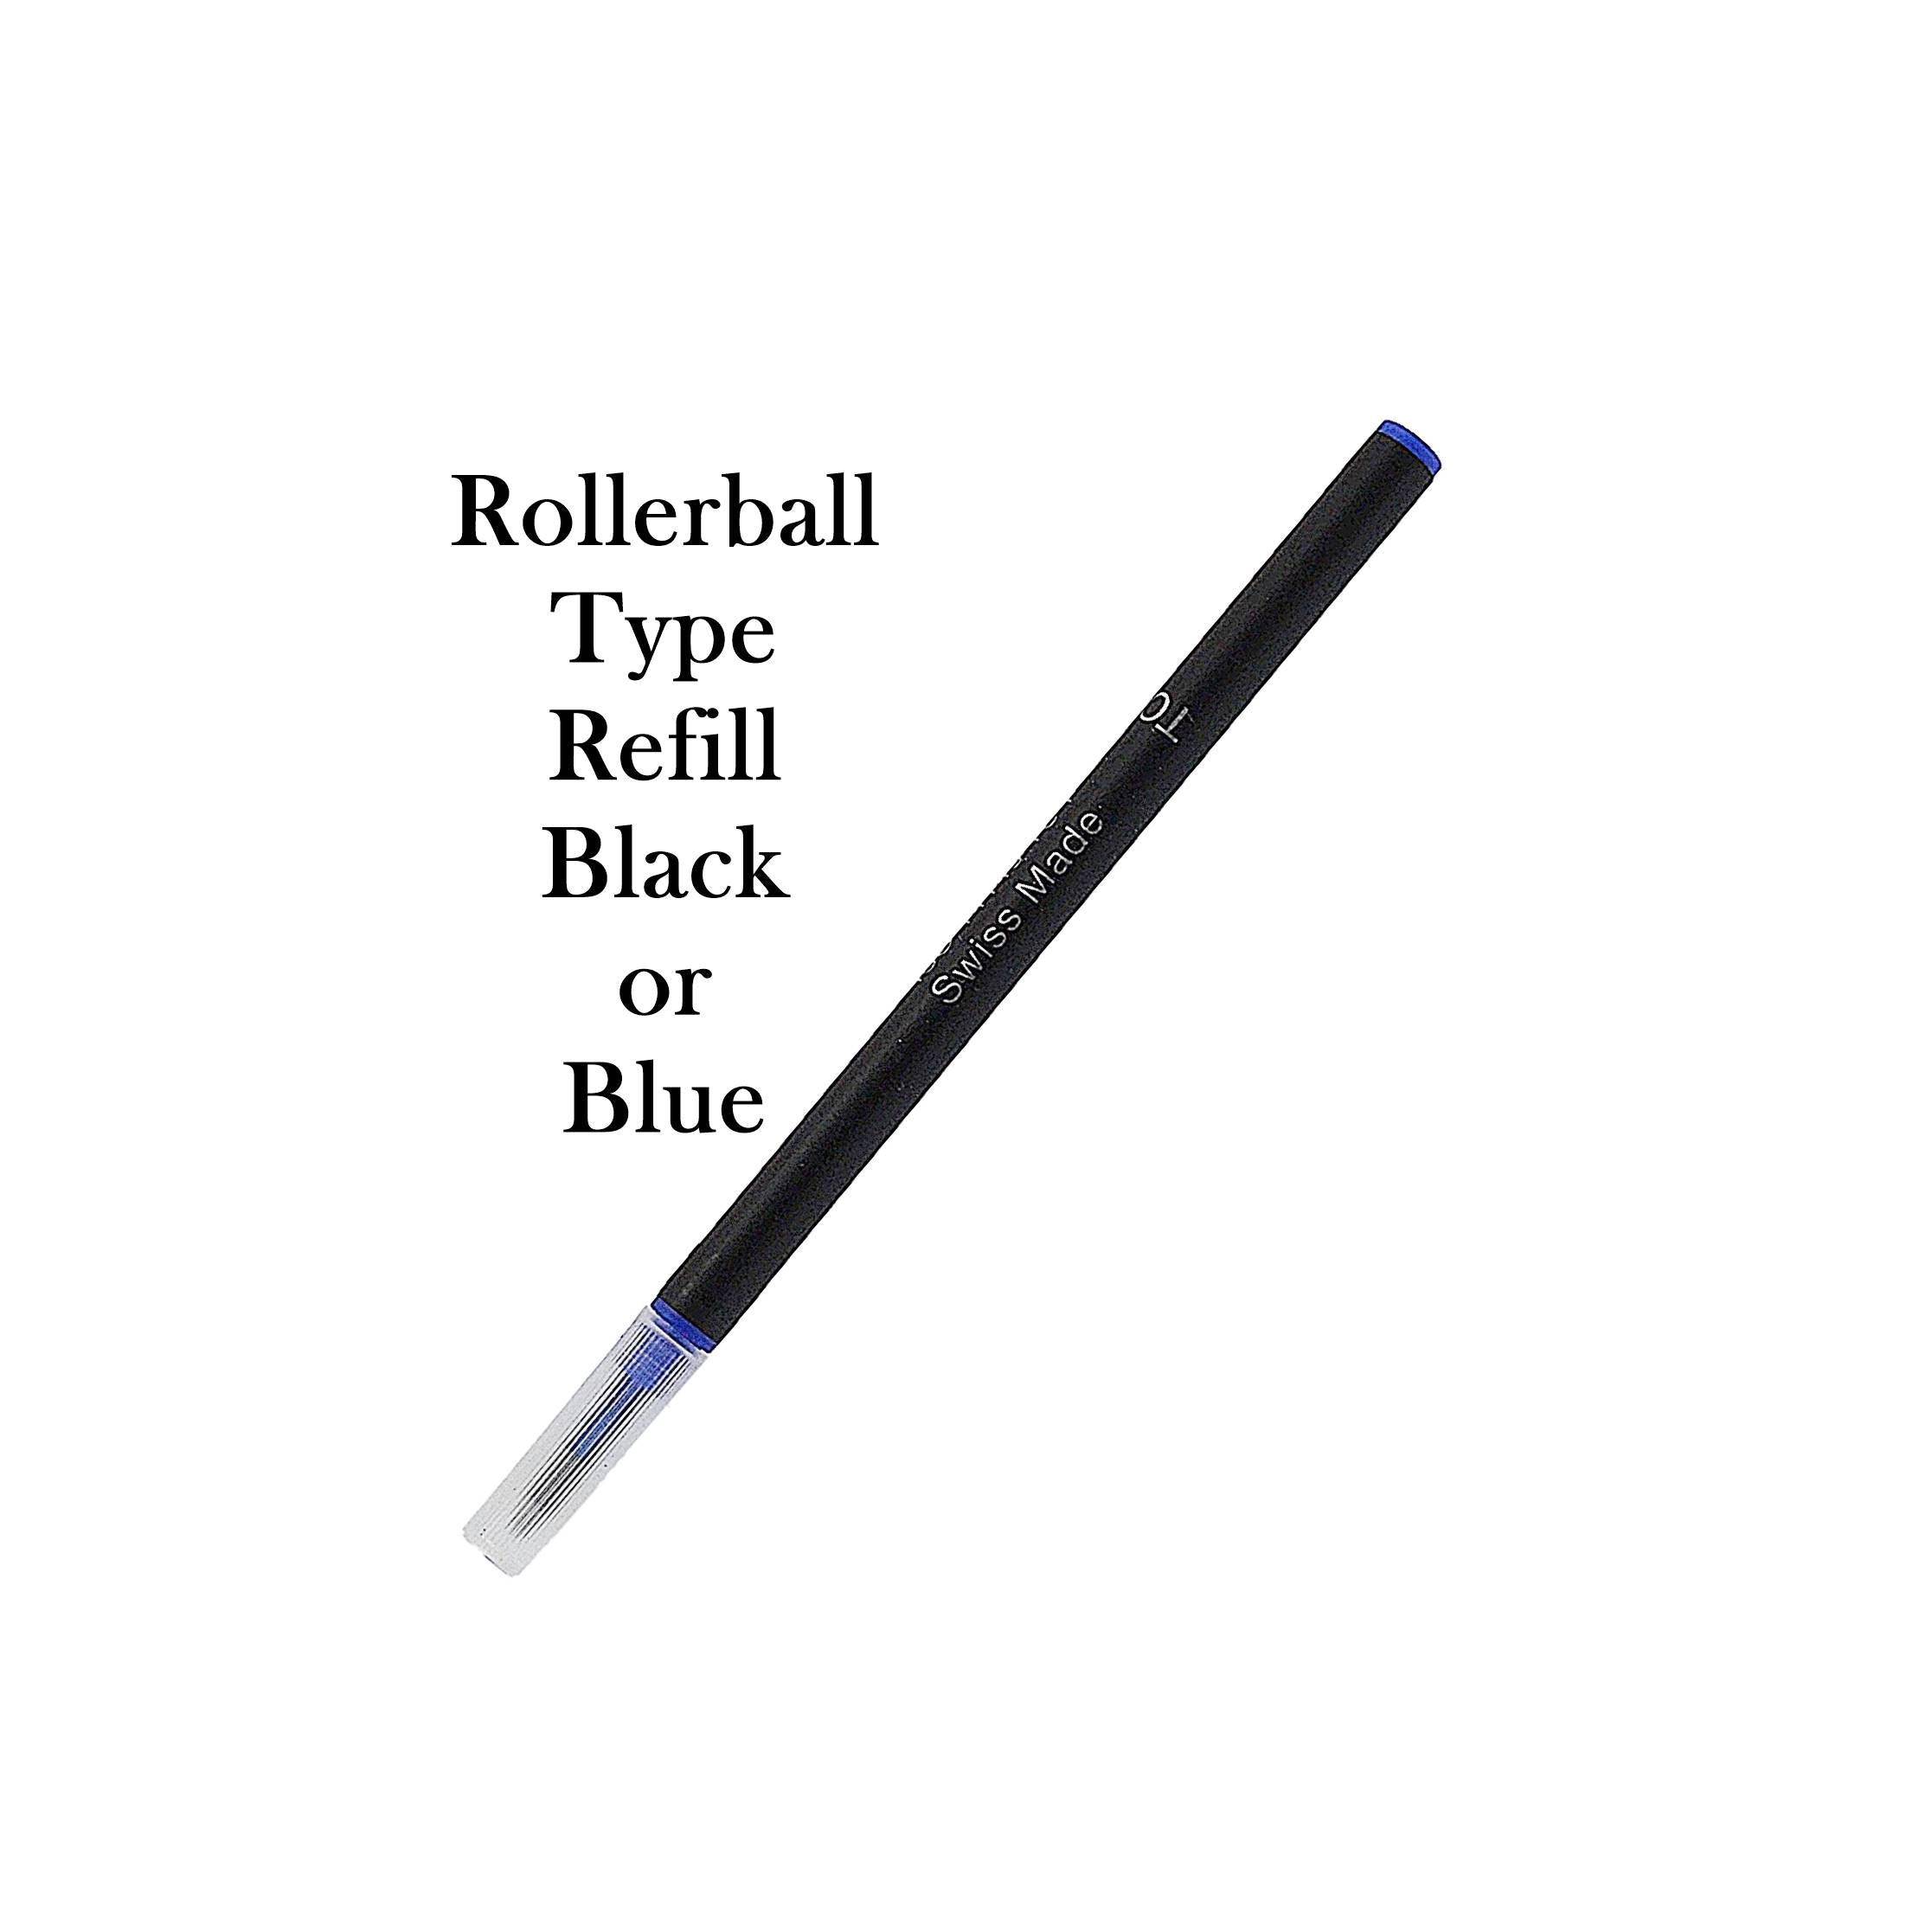 Fits most of the world's finest capped rollerball pens. This refill is compatible with brands such as : ACME, Aurora, Bexley, Delta, Diplomat, Faber, Castell, Hauser, Inoxcrom, Itoya, Krone, Marlen, Montegrappa, Monteverde, Omas, Pelikan, Retro 51, Rotring, Stipula, Waterman, and Visconti. rollerball refill